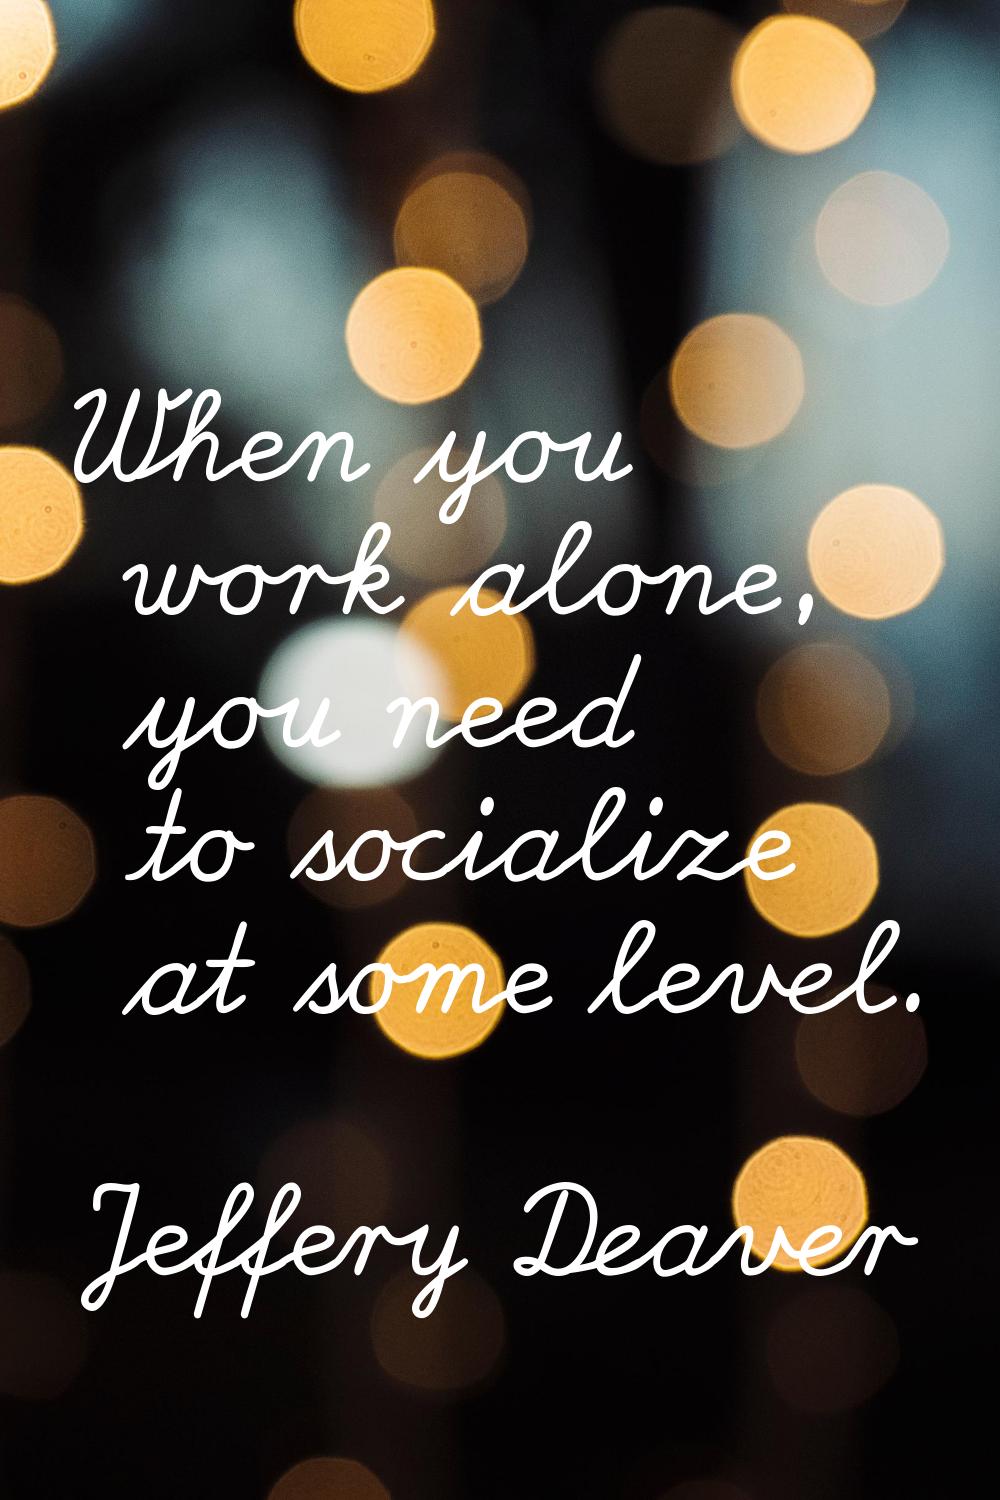 When you work alone, you need to socialize at some level.